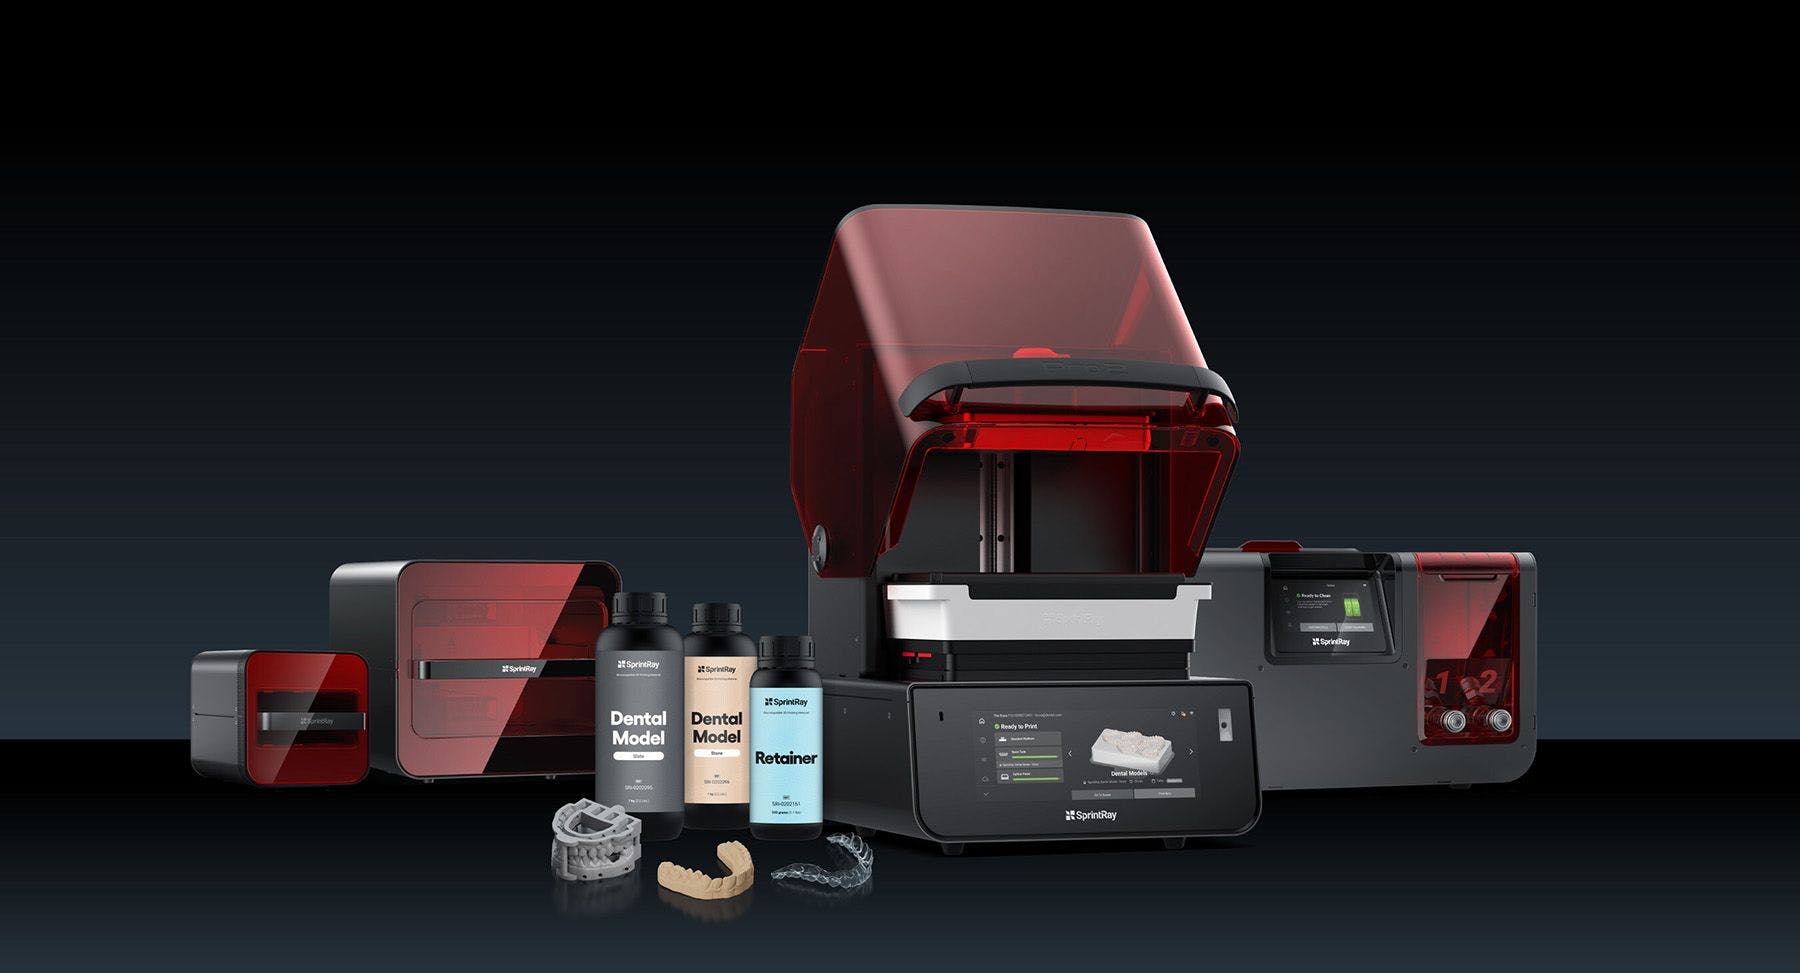 SprintRay Launches Pro 2 3D Printer Along with New Resins | Image Credit: © SprintRay, Inc 